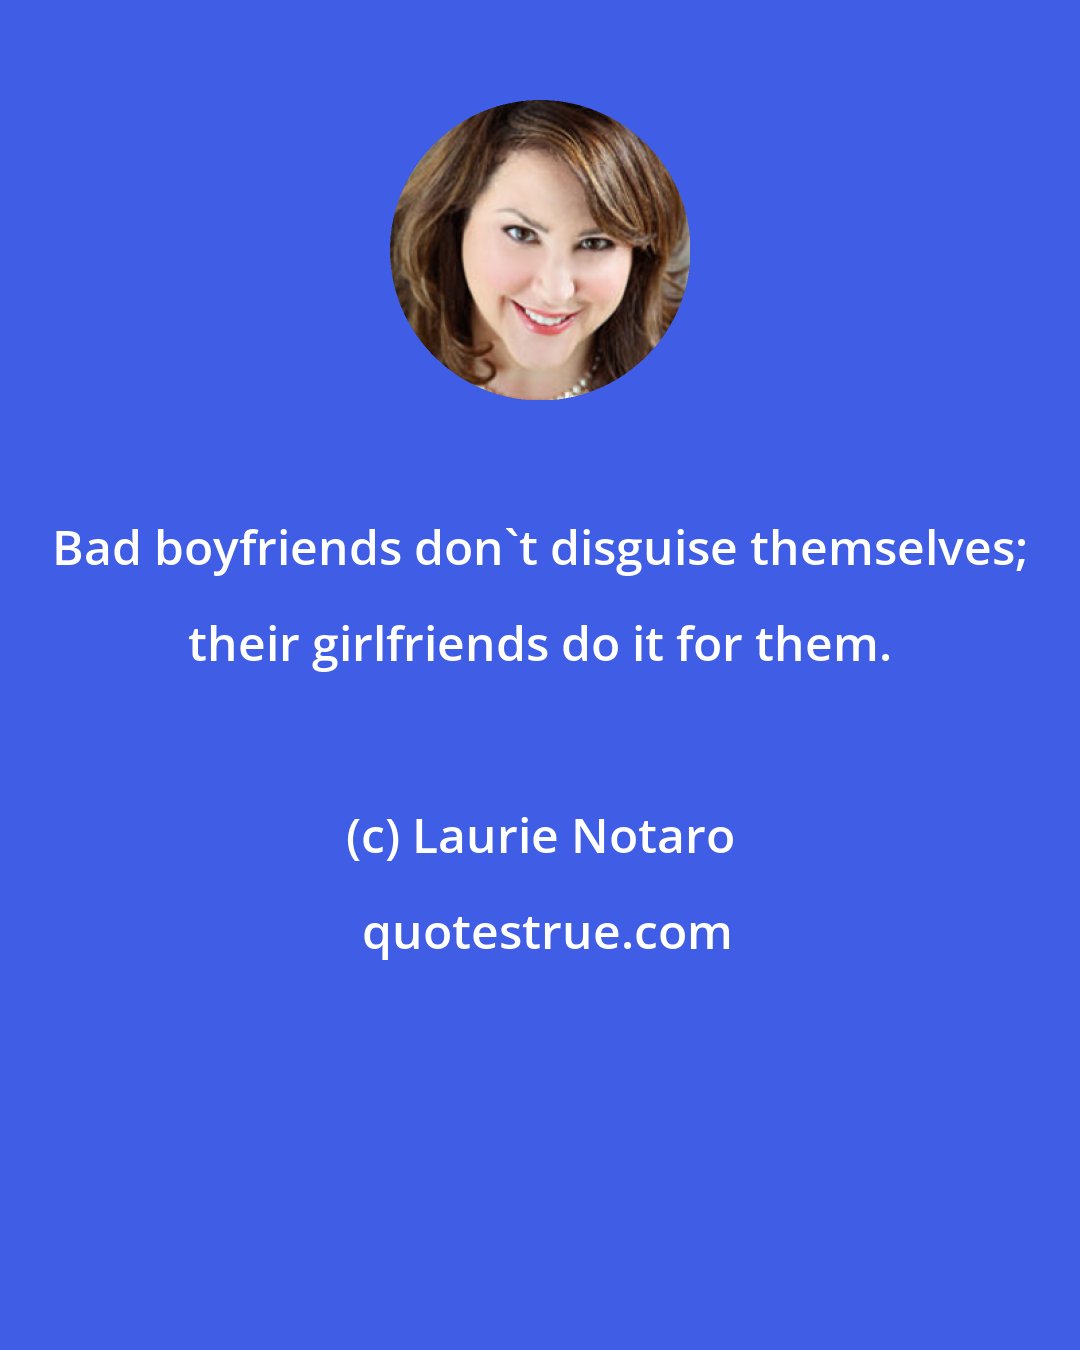 Laurie Notaro: Bad boyfriends don't disguise themselves; their girlfriends do it for them.